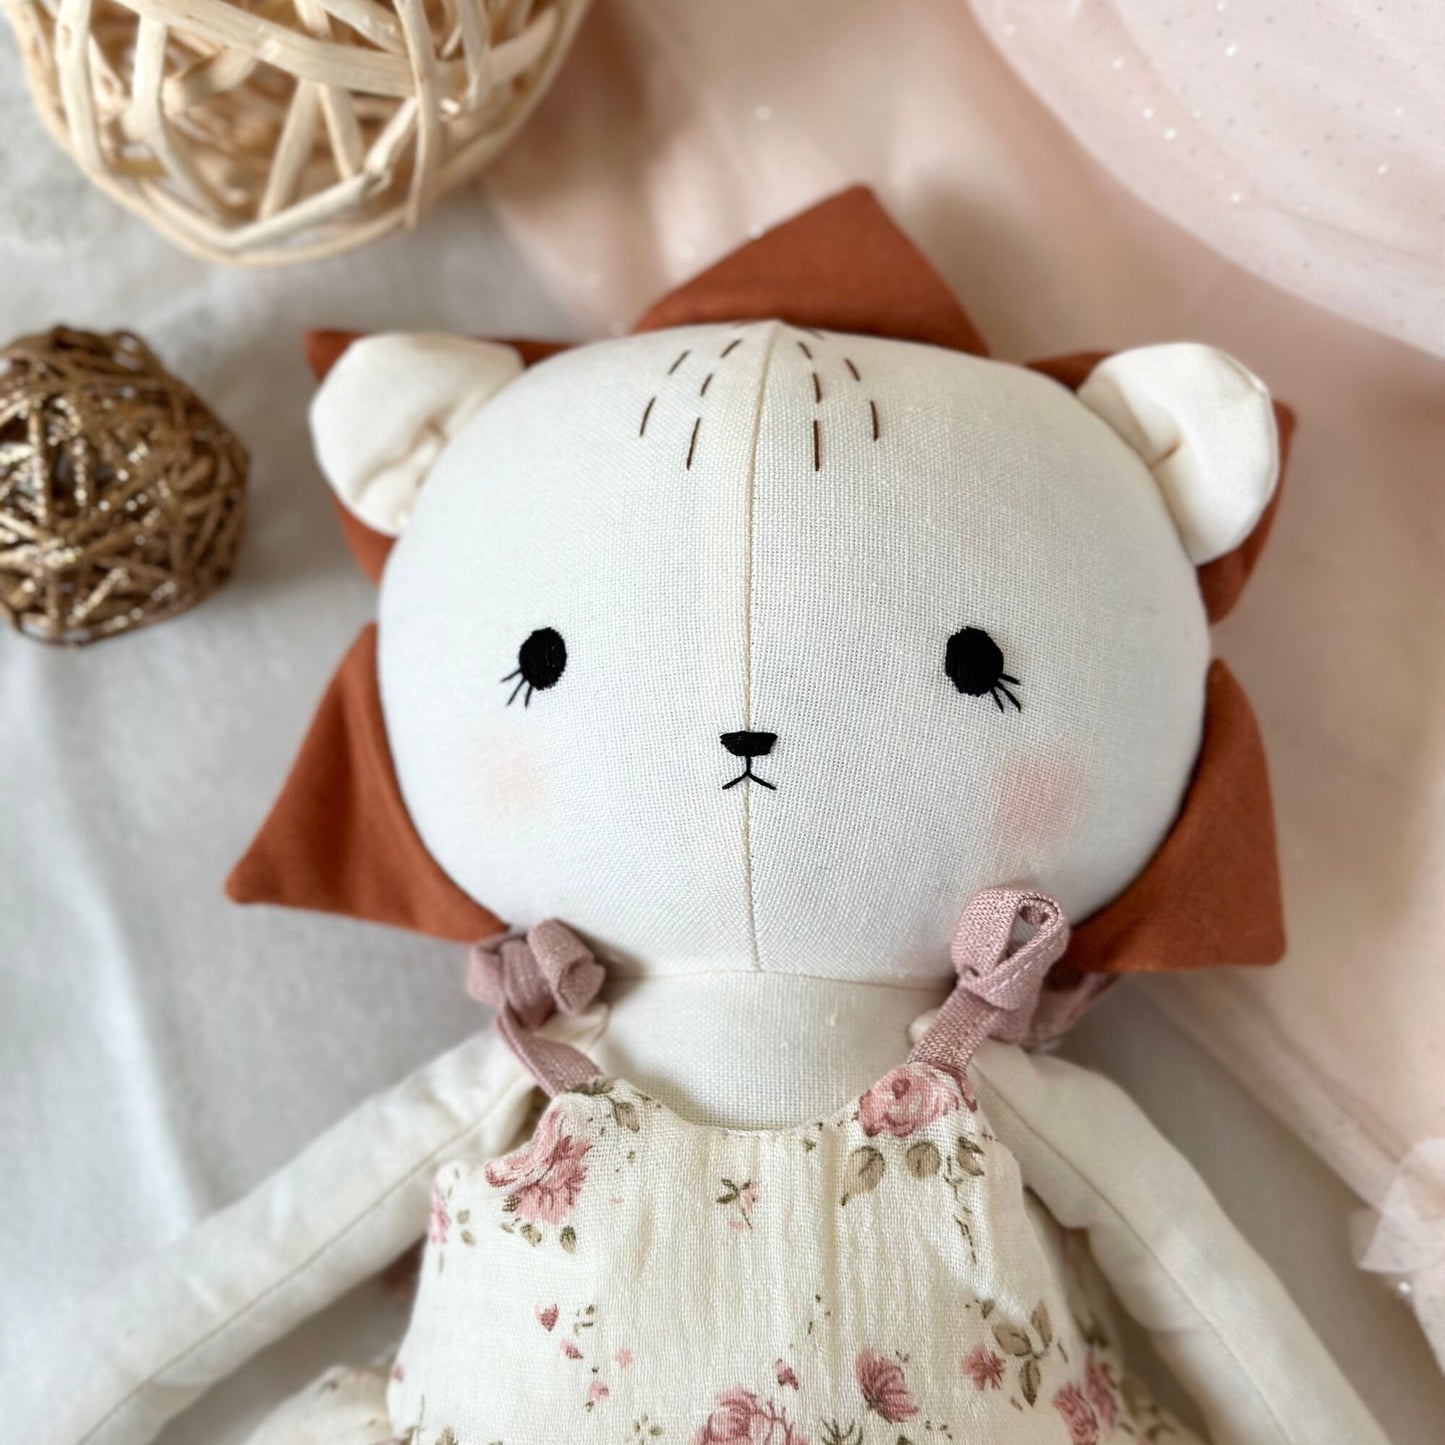 Ready To Ship, Rio Handmade Linen Lion Toy, Nursery Decor Stuffed, Linen Baby Toy, Soft Stuffed Lion Toy For Toddler, Kid, Adult Hobby